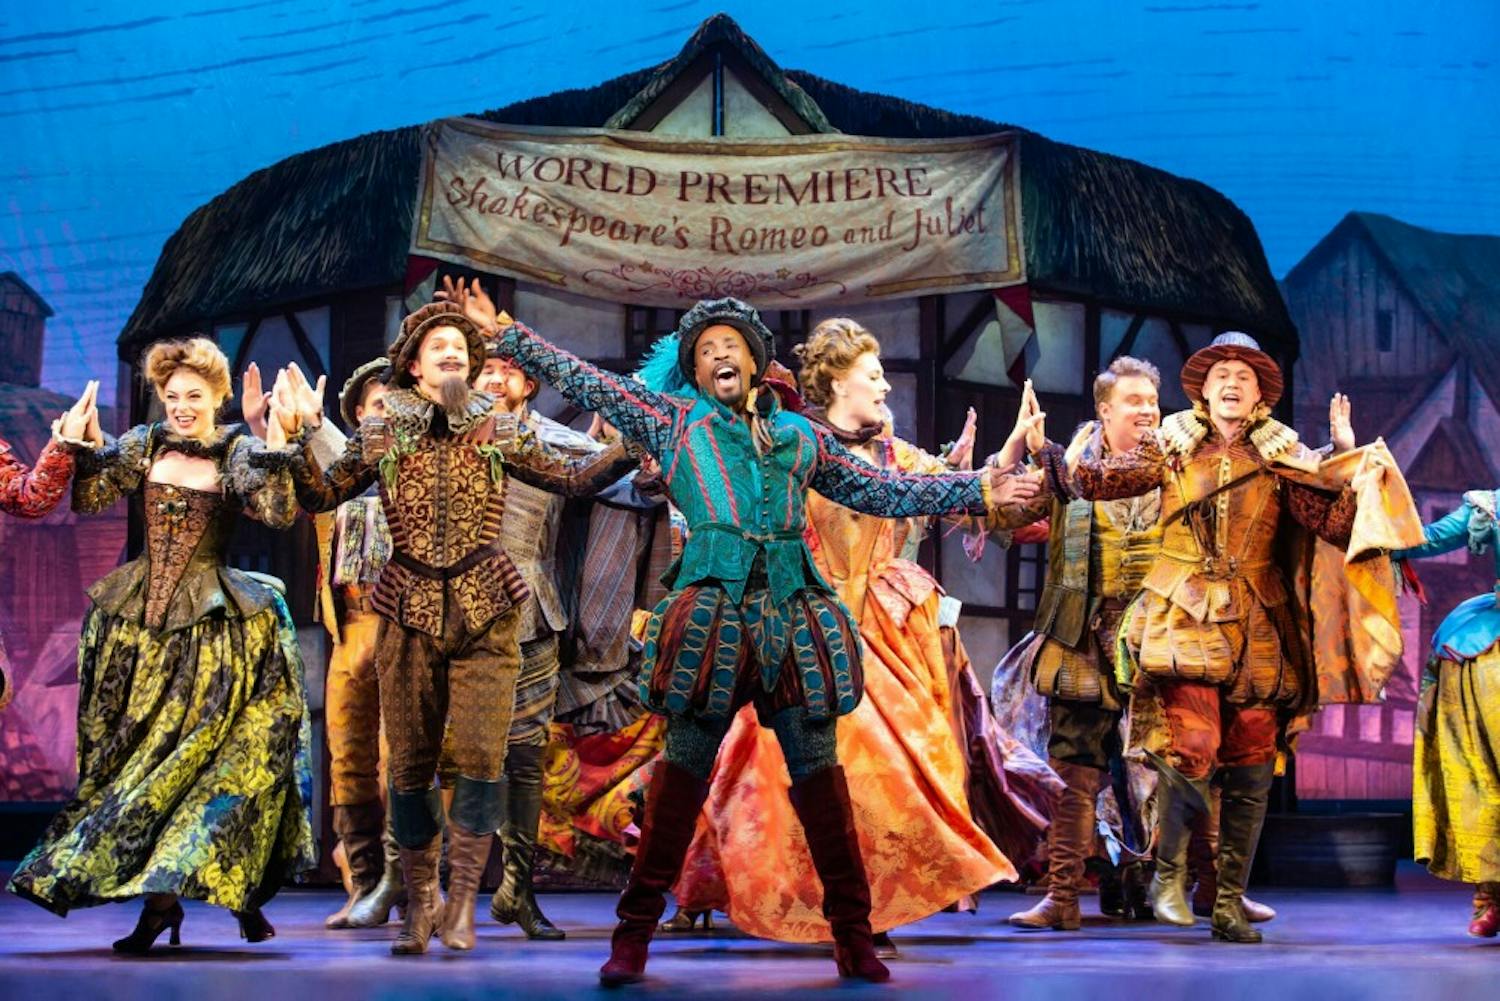 The playful Broadway musical set in Renaissance-era London centered on the plight of brothers Nick and Nigel Bottom and their struggle to become as famous and renowned as William Shakespeare.